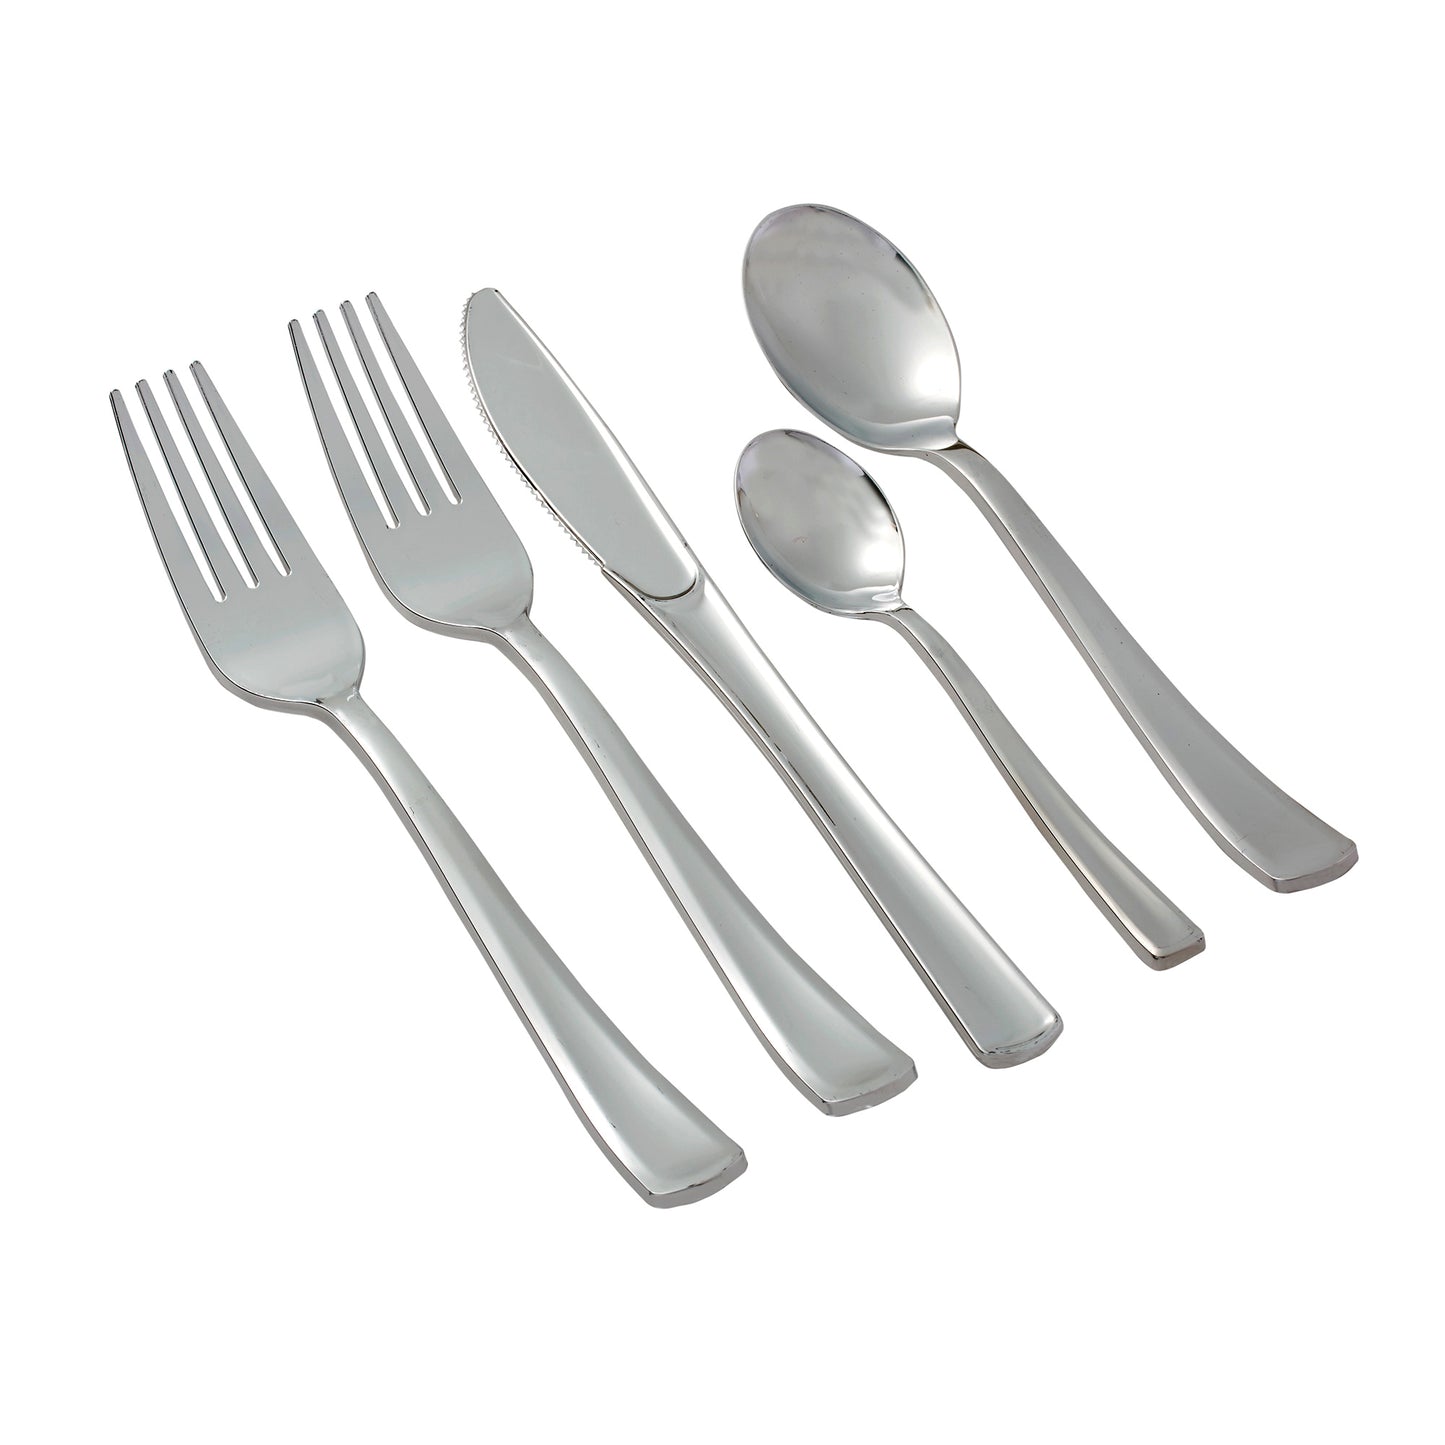 350-Piece Silver Dinnerware set for 50 guests Includes: 100 silver marble design plastic plates, 250 silver-colored plastic silverware utensils